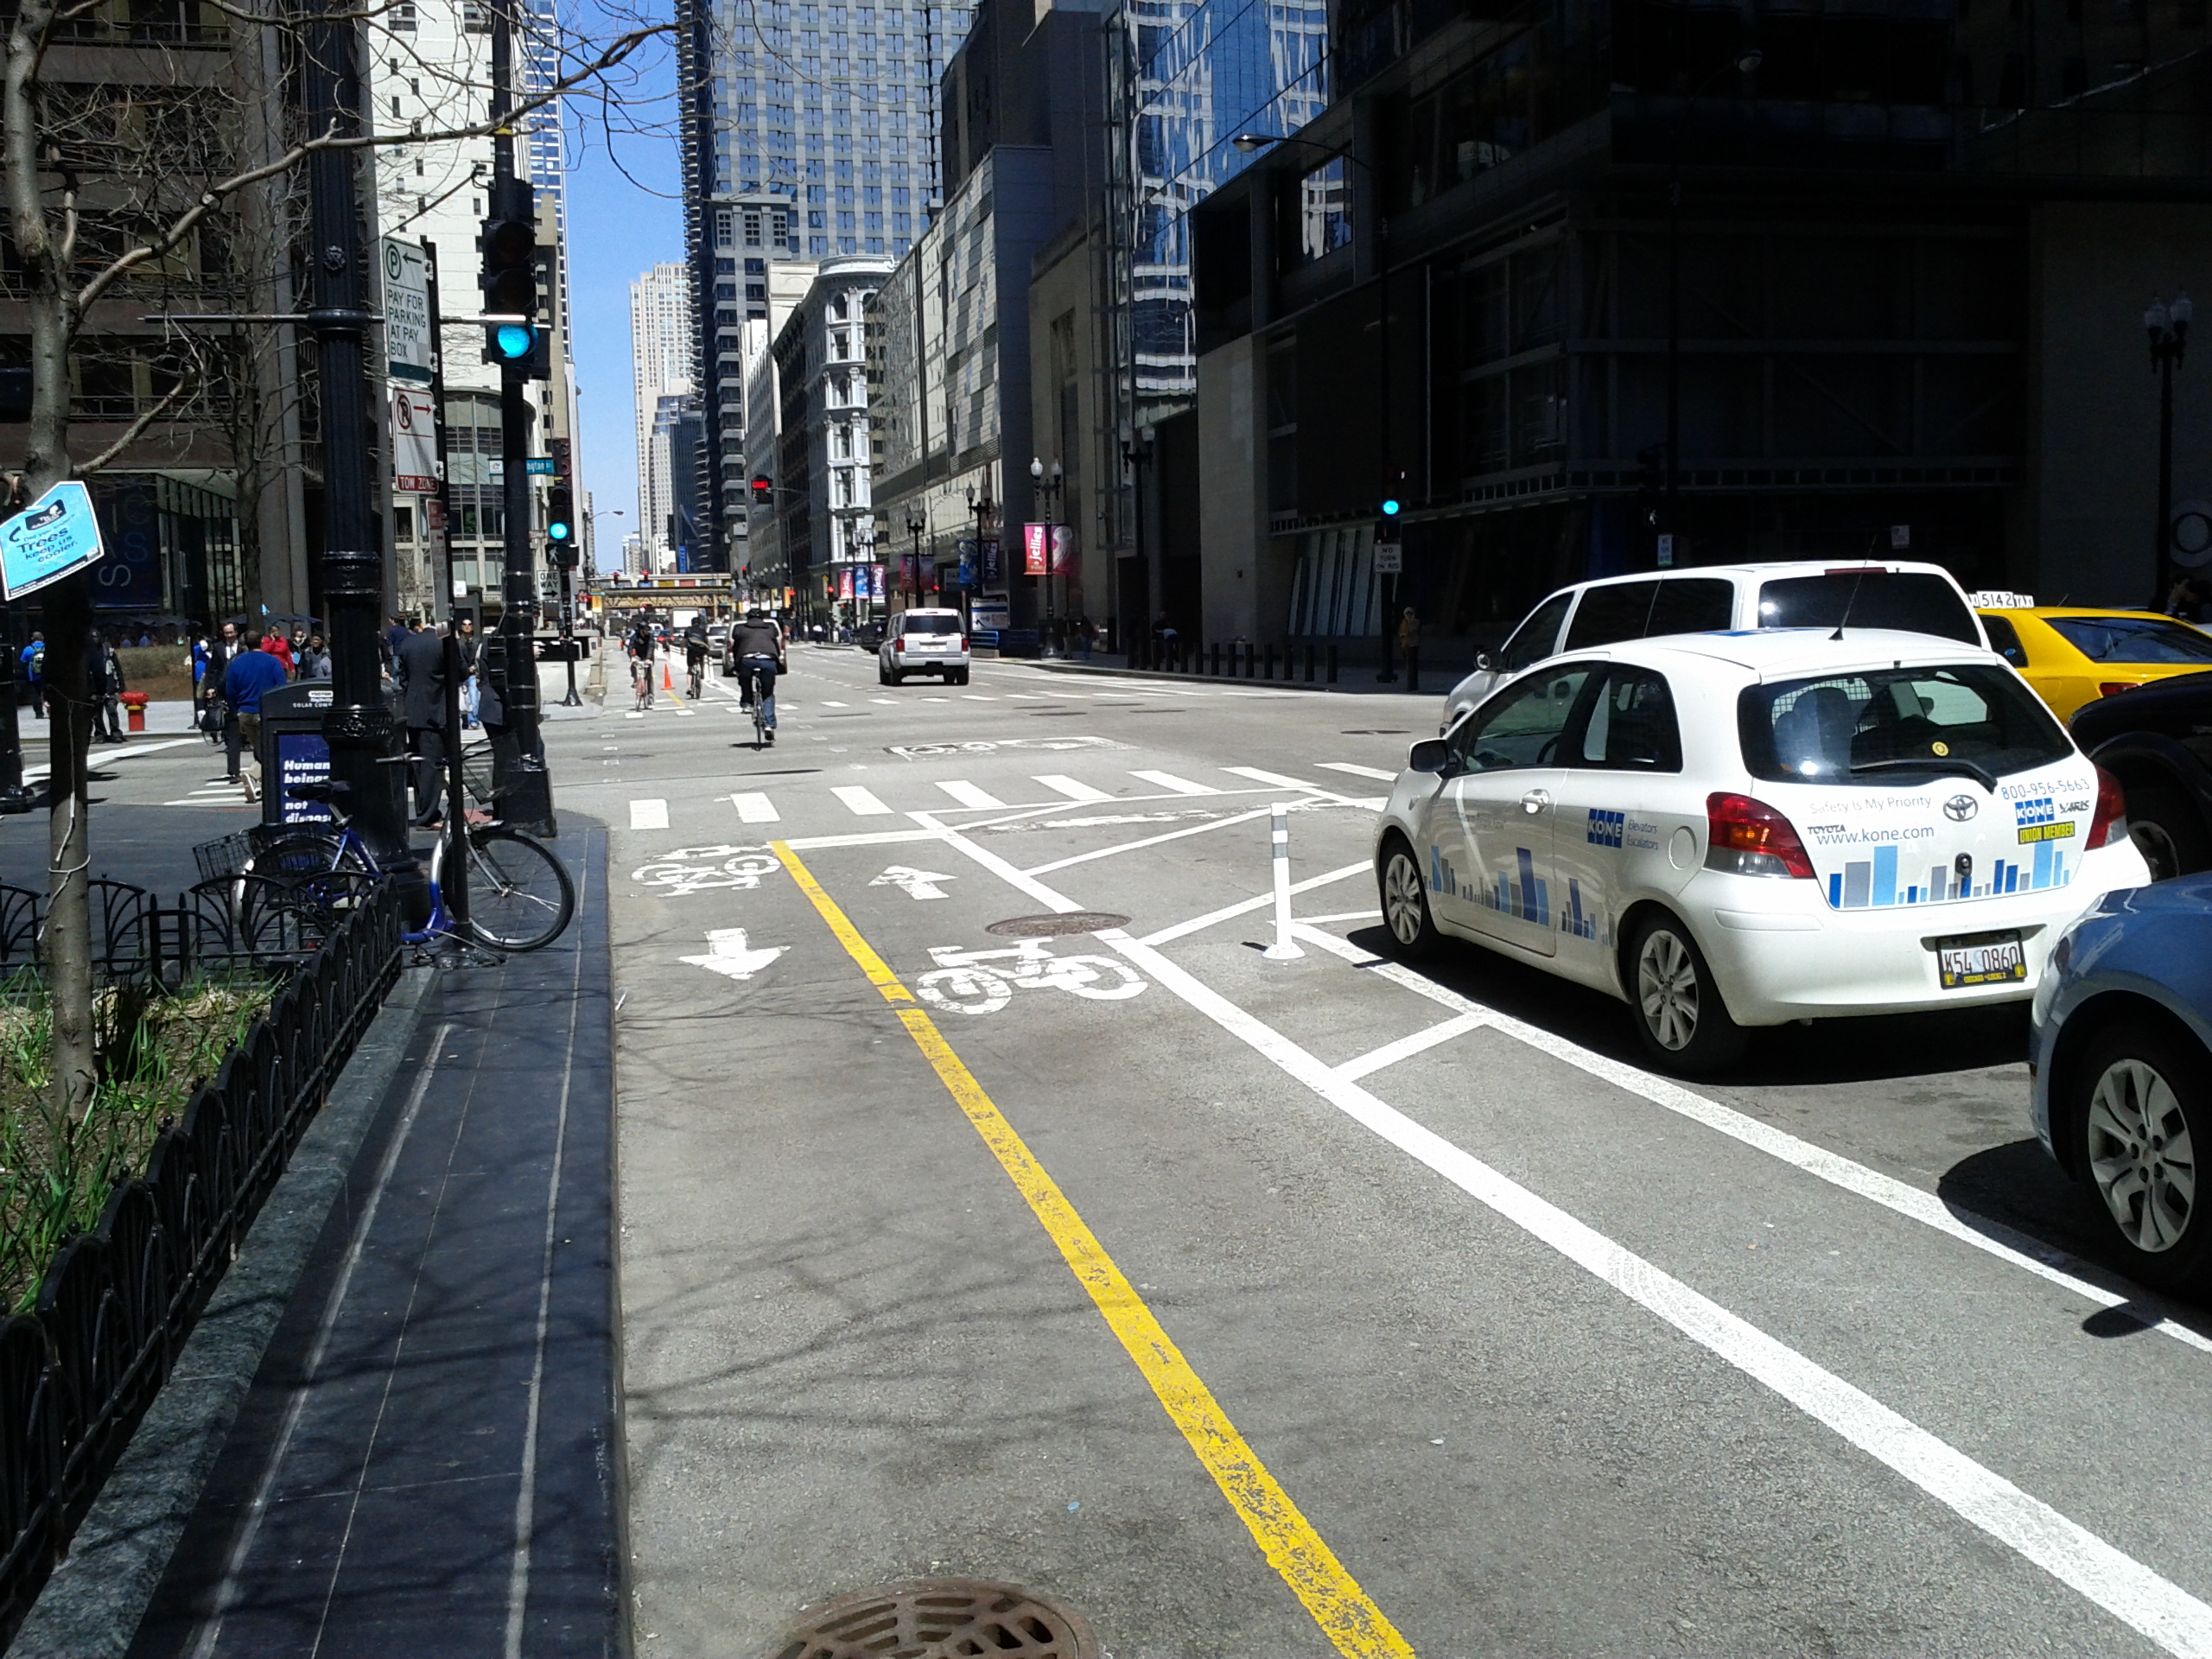 A photograph taken at street level in the two-way protected bike lane on Dearborn Street near its intersection with Washington Street) in downtown Chicago. Bicyclists are using the bike lane in the distance. Parked vehicles and a striped area separate the lane from moving traffic on the right of the photograph. On the left, the street curb and a planted area separate the bike lane from the sidewalk. 